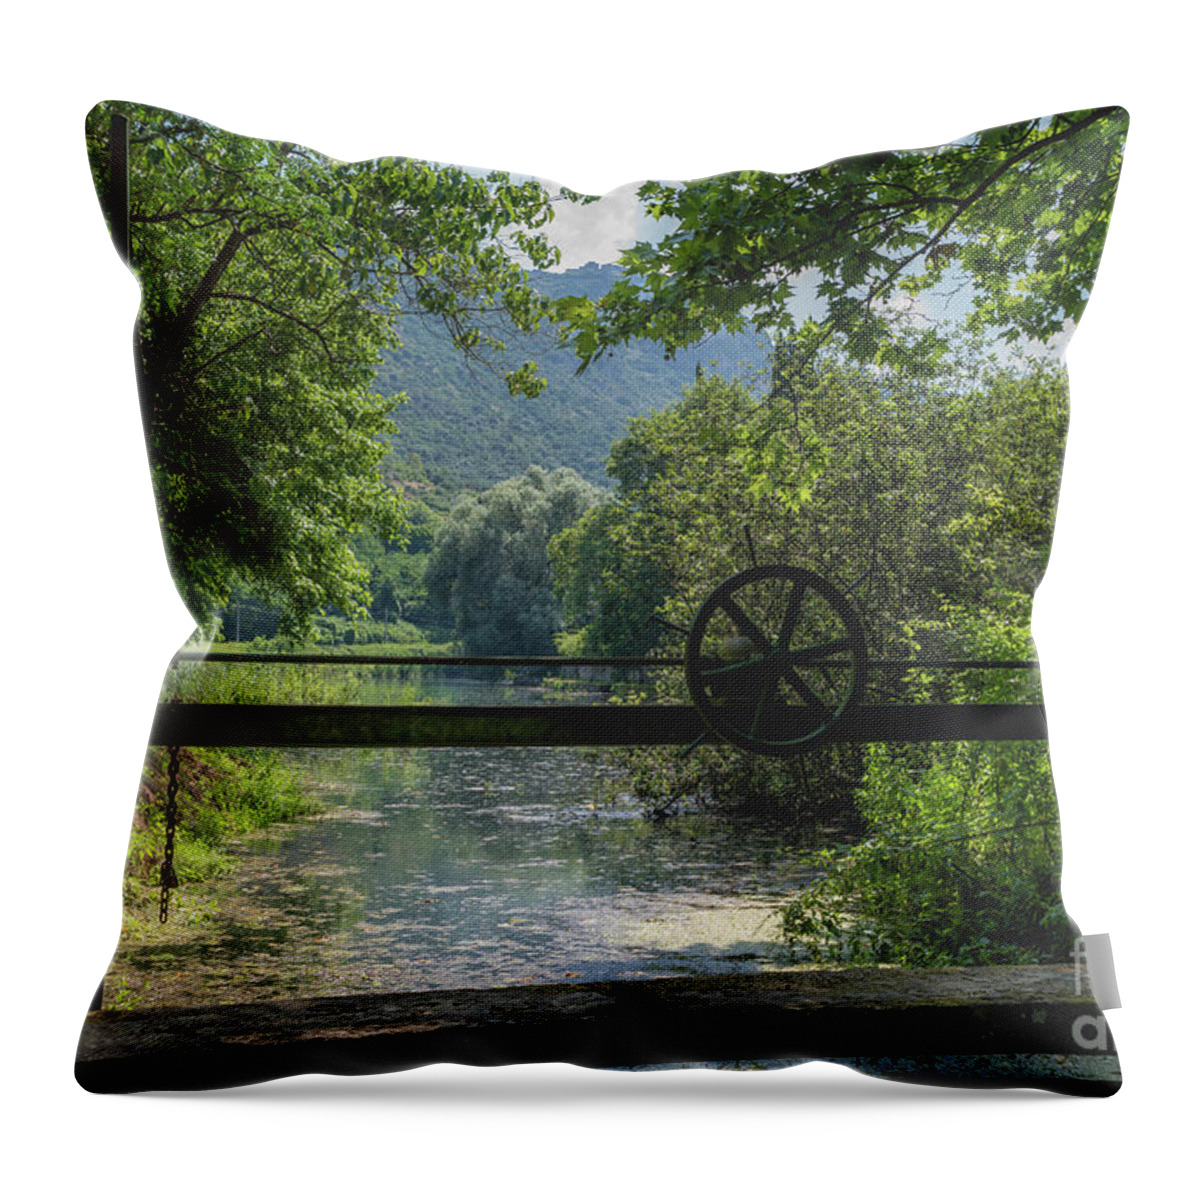 Ninfa Throw Pillow featuring the photograph Ninfa Waterway, Rome Italy by Perry Rodriguez